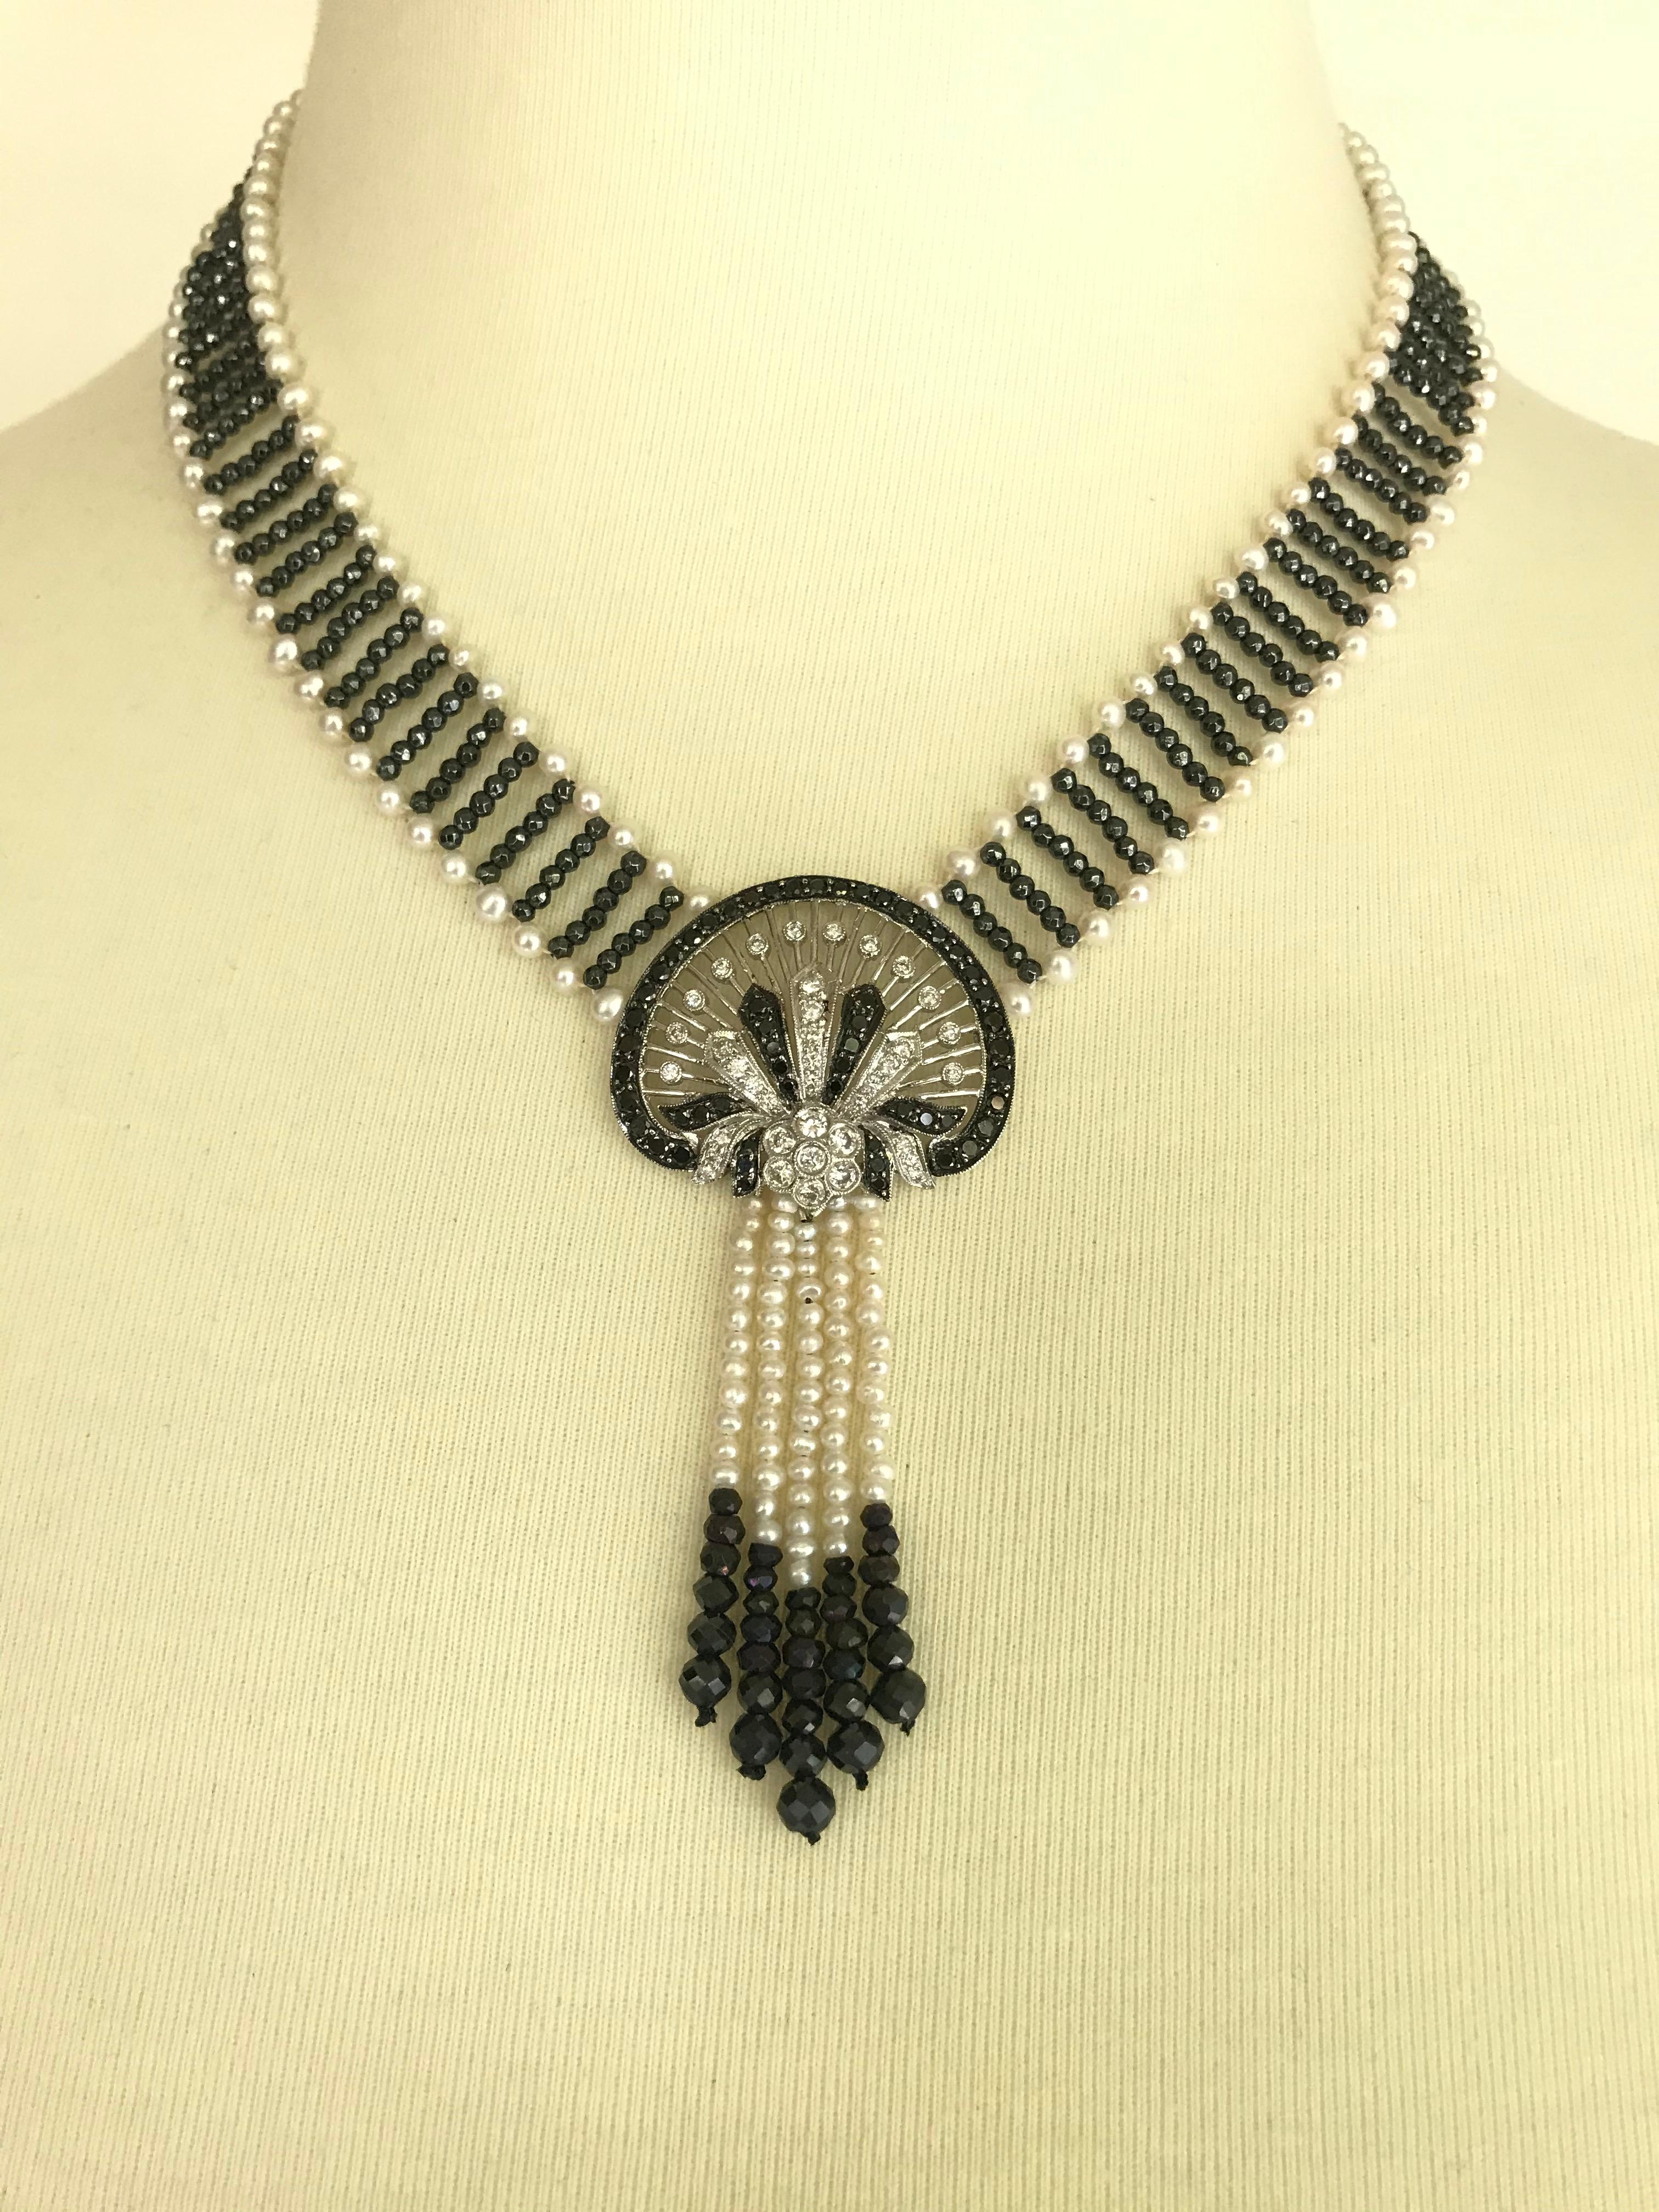 This is a vibrant ,one of a kind necklace with diamonds, black diamonds, pearls and hematite beads creating a lace like appearance. The magnificent hand woven piece is  accentuated with a  14 karat white gold centerpiece with dangling pearl and